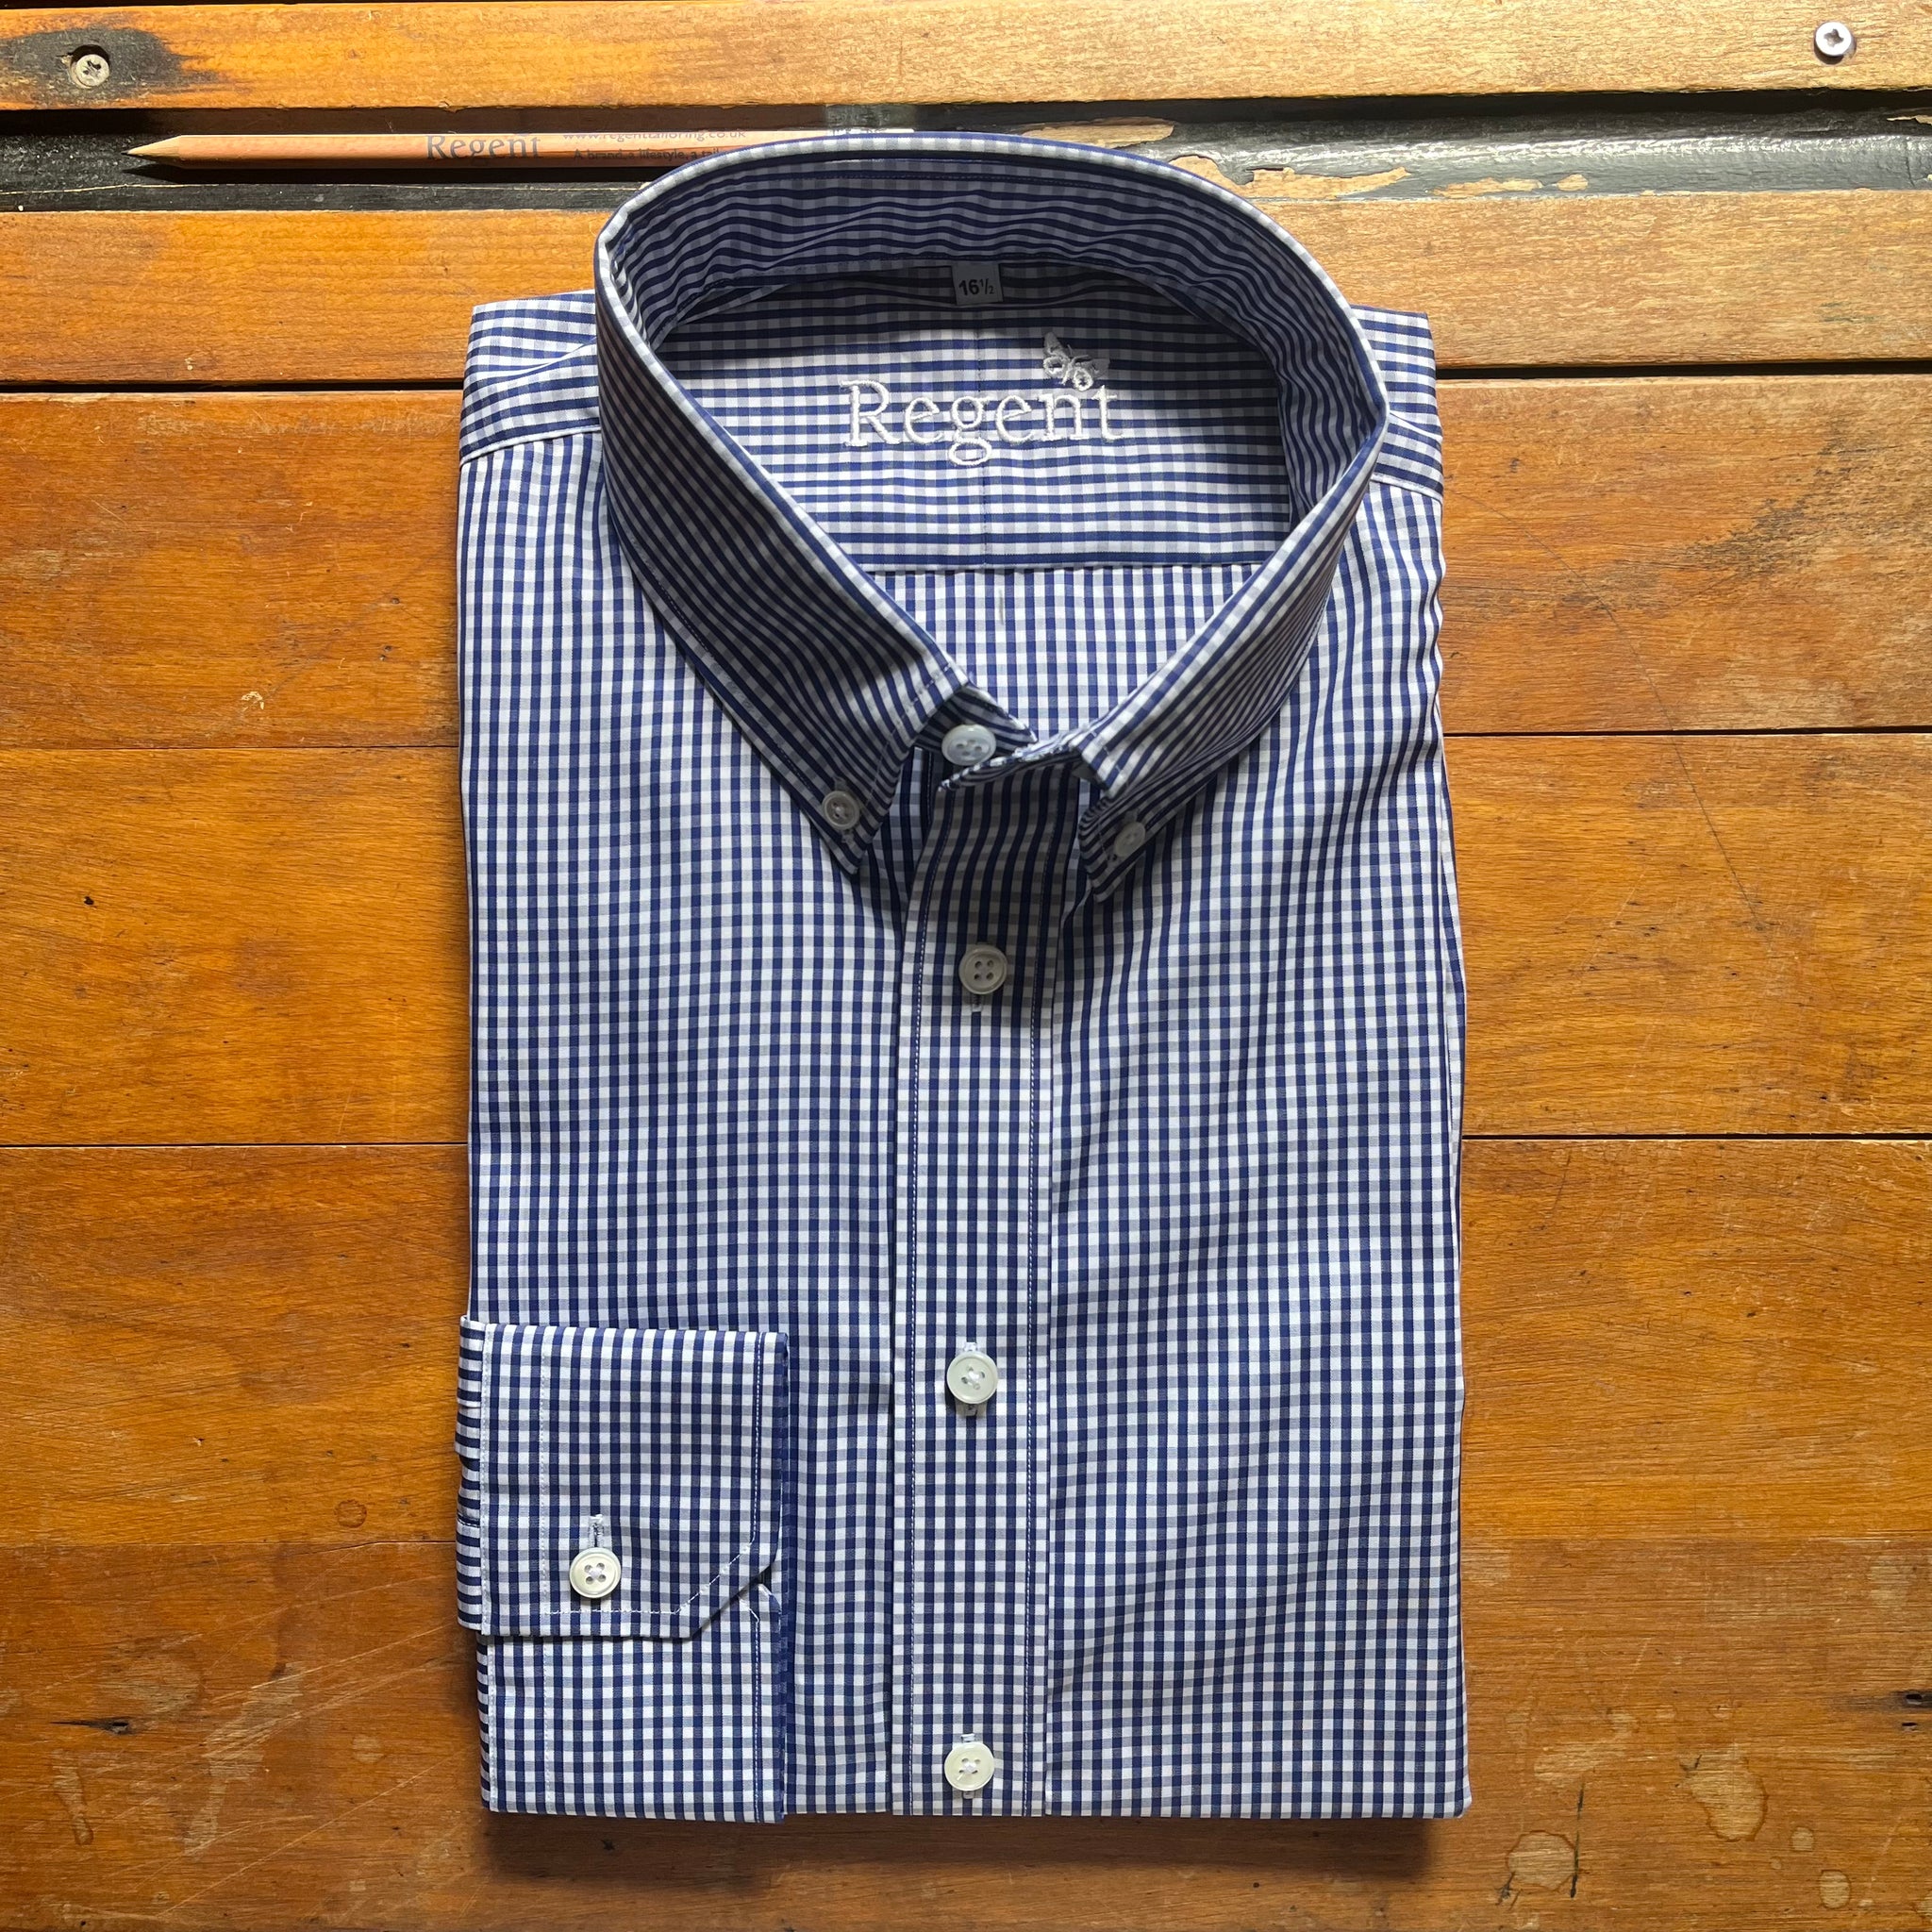 Navy gingham check with button down collar